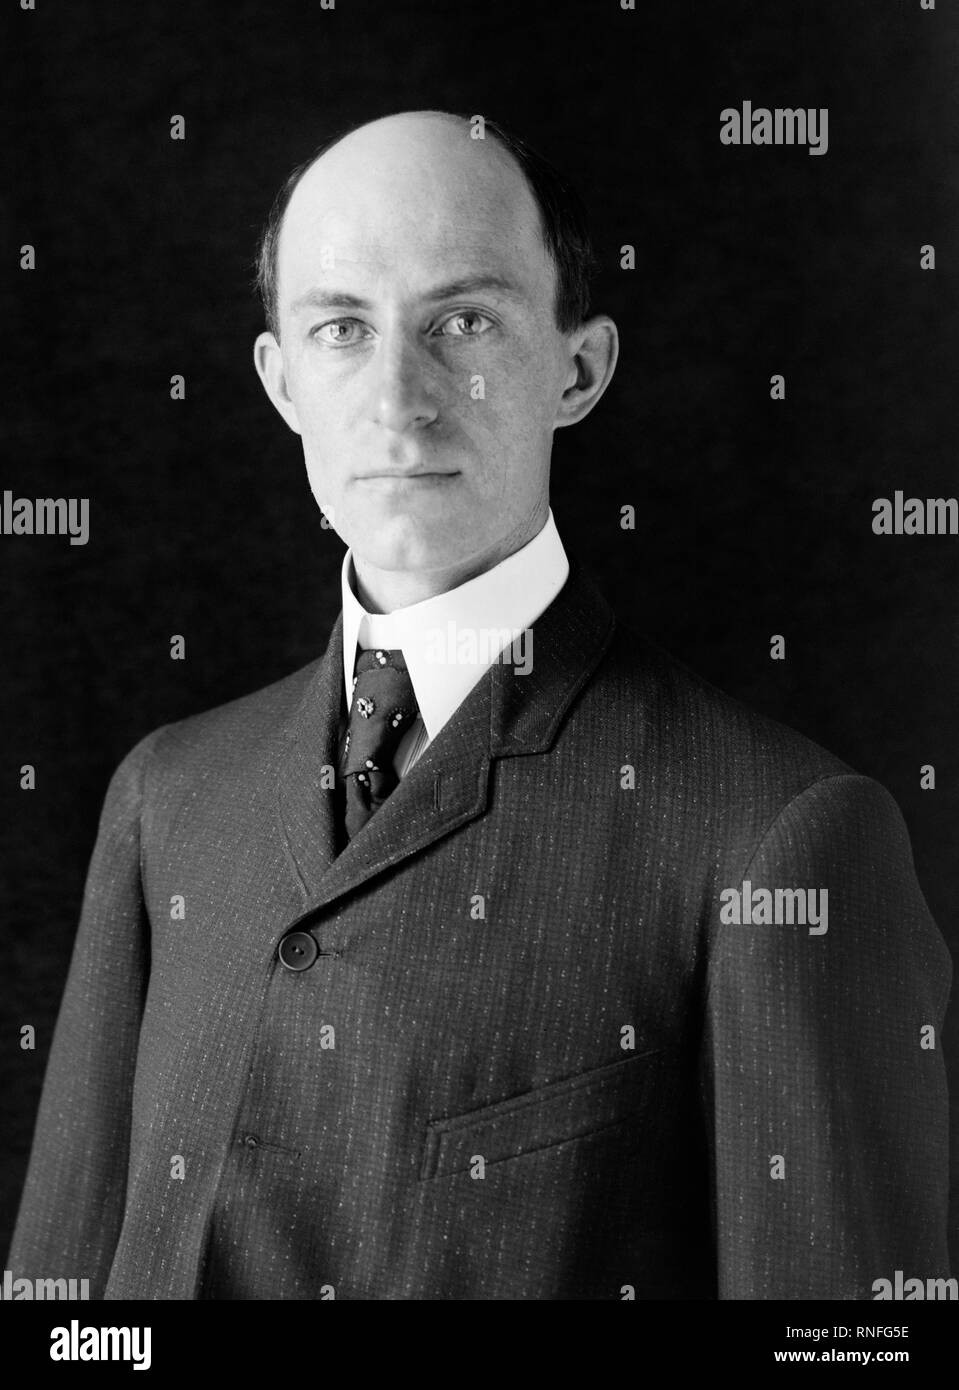 Wilbur Wright aged 38 of the Wright Brothers circa 1905  Image updated using digital restoration and retouching techniques Stock Photo